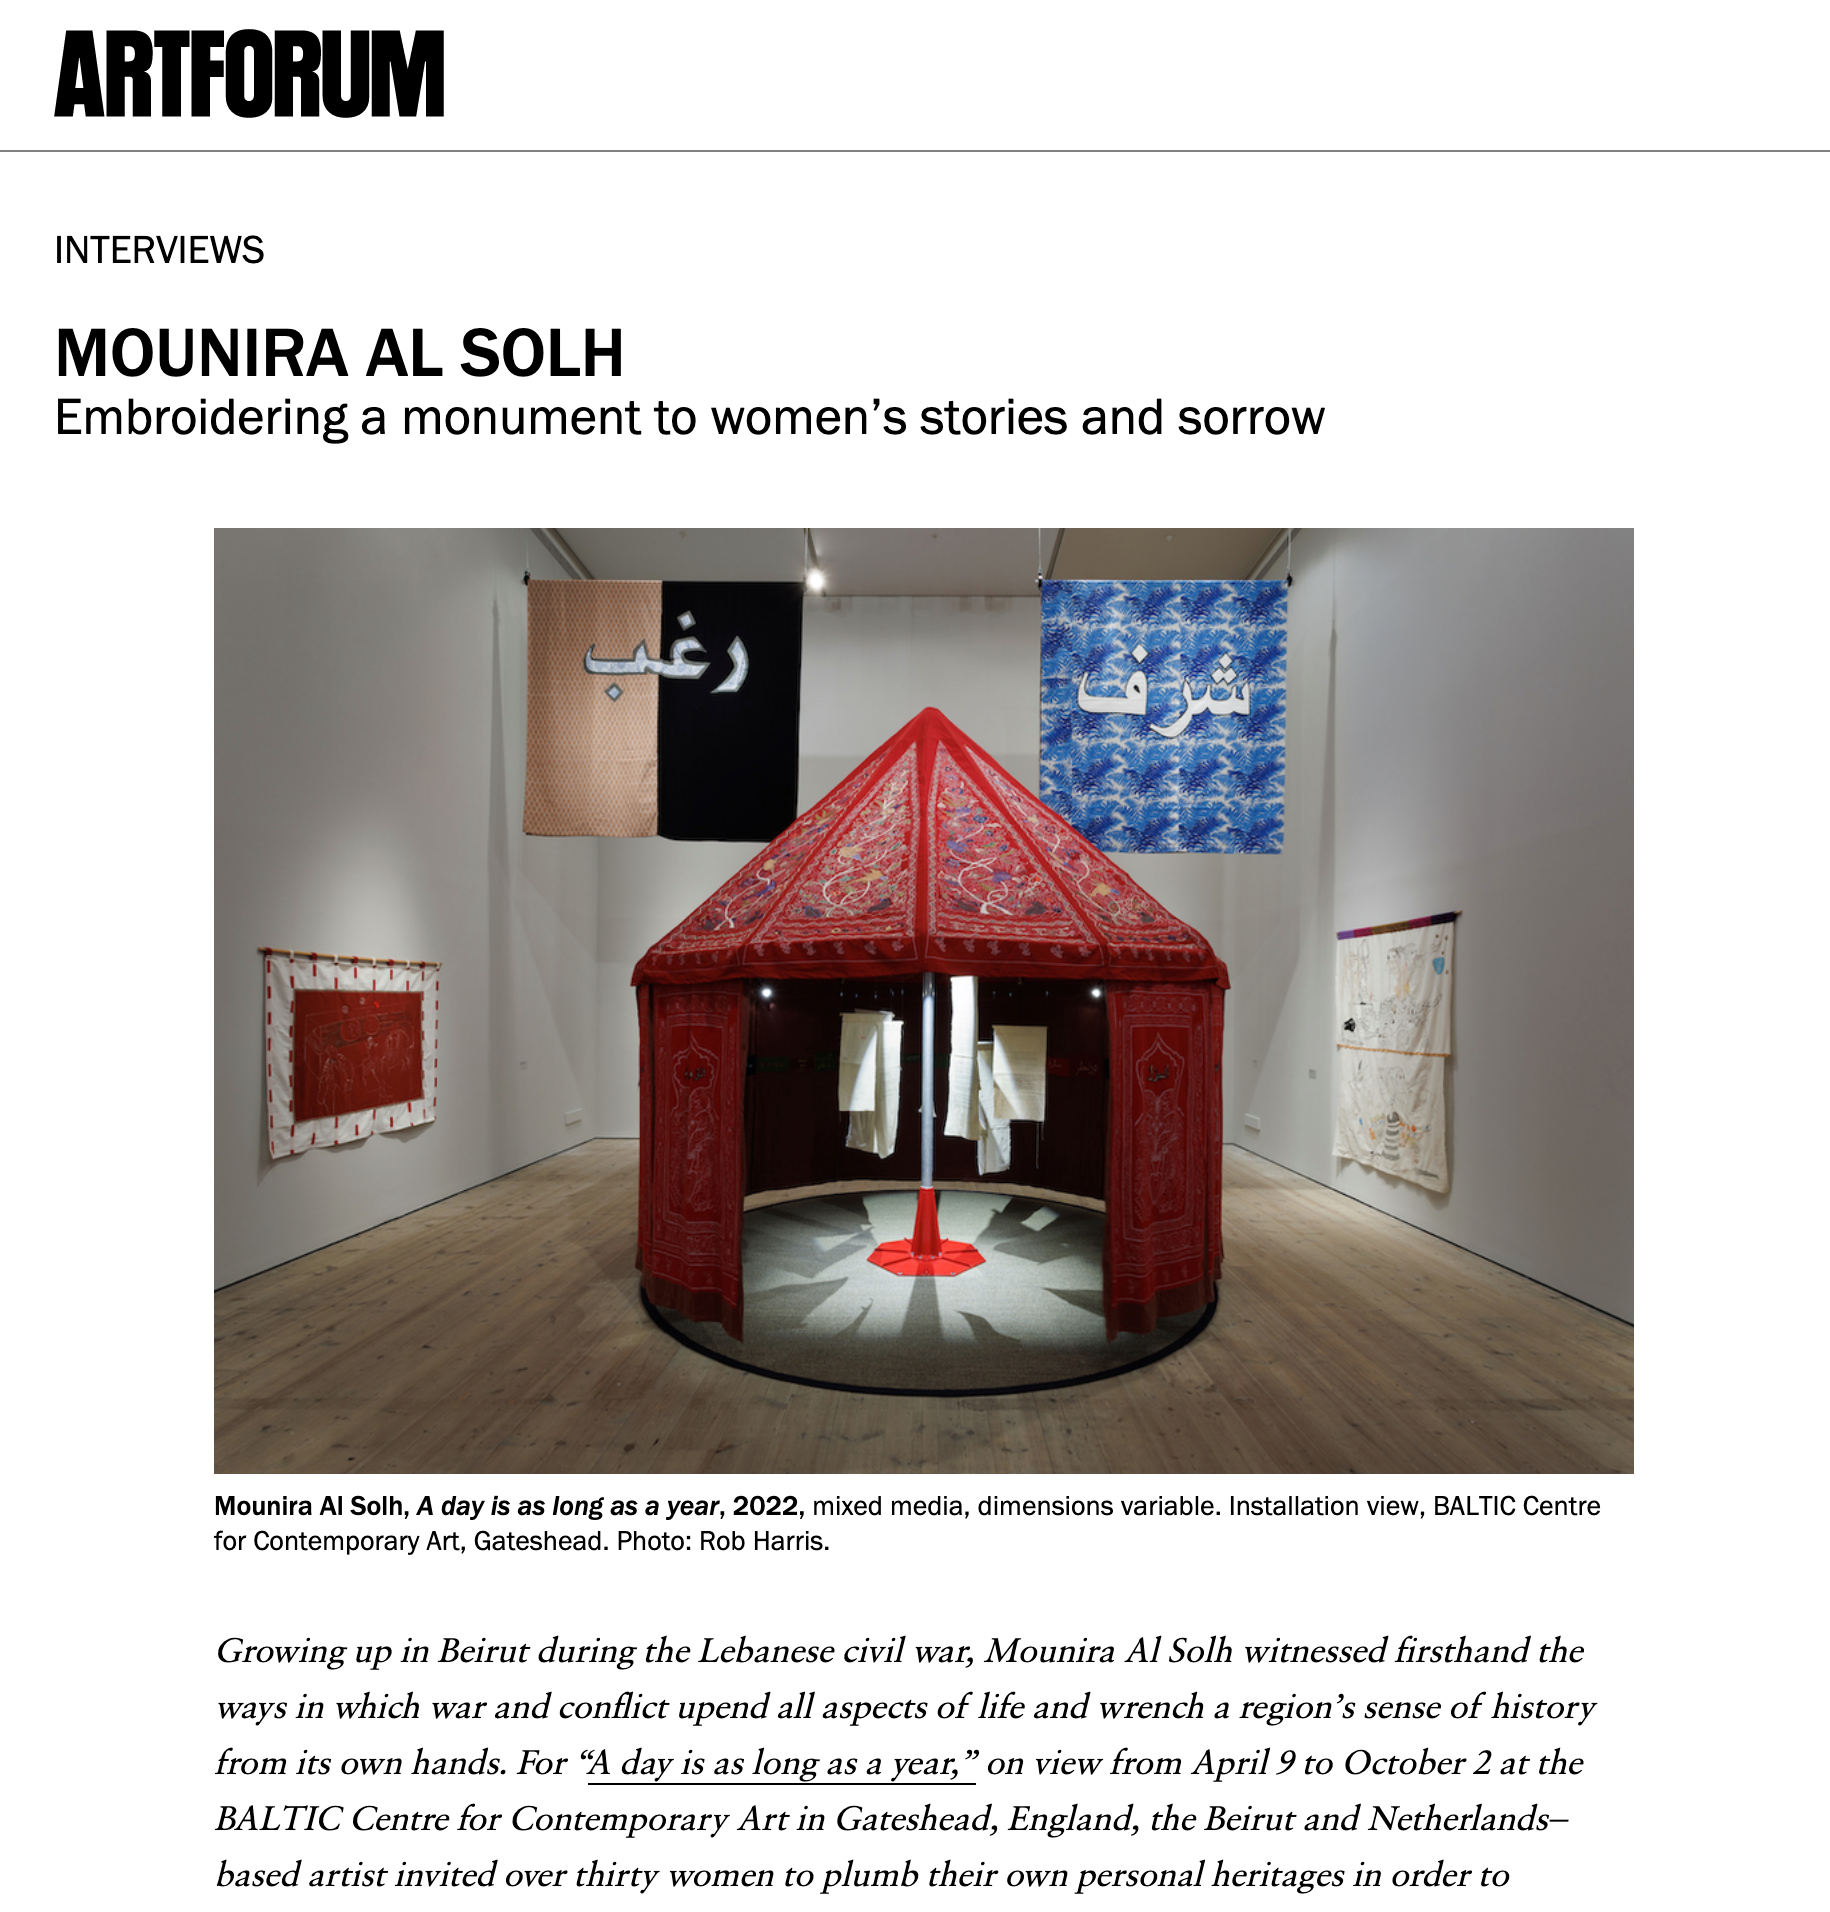 Mounira Al Solh “Embroidering a monument to women’s stories and sorrow”, — Interview with Juliana Halpert | via Artforum, May 3, 2022